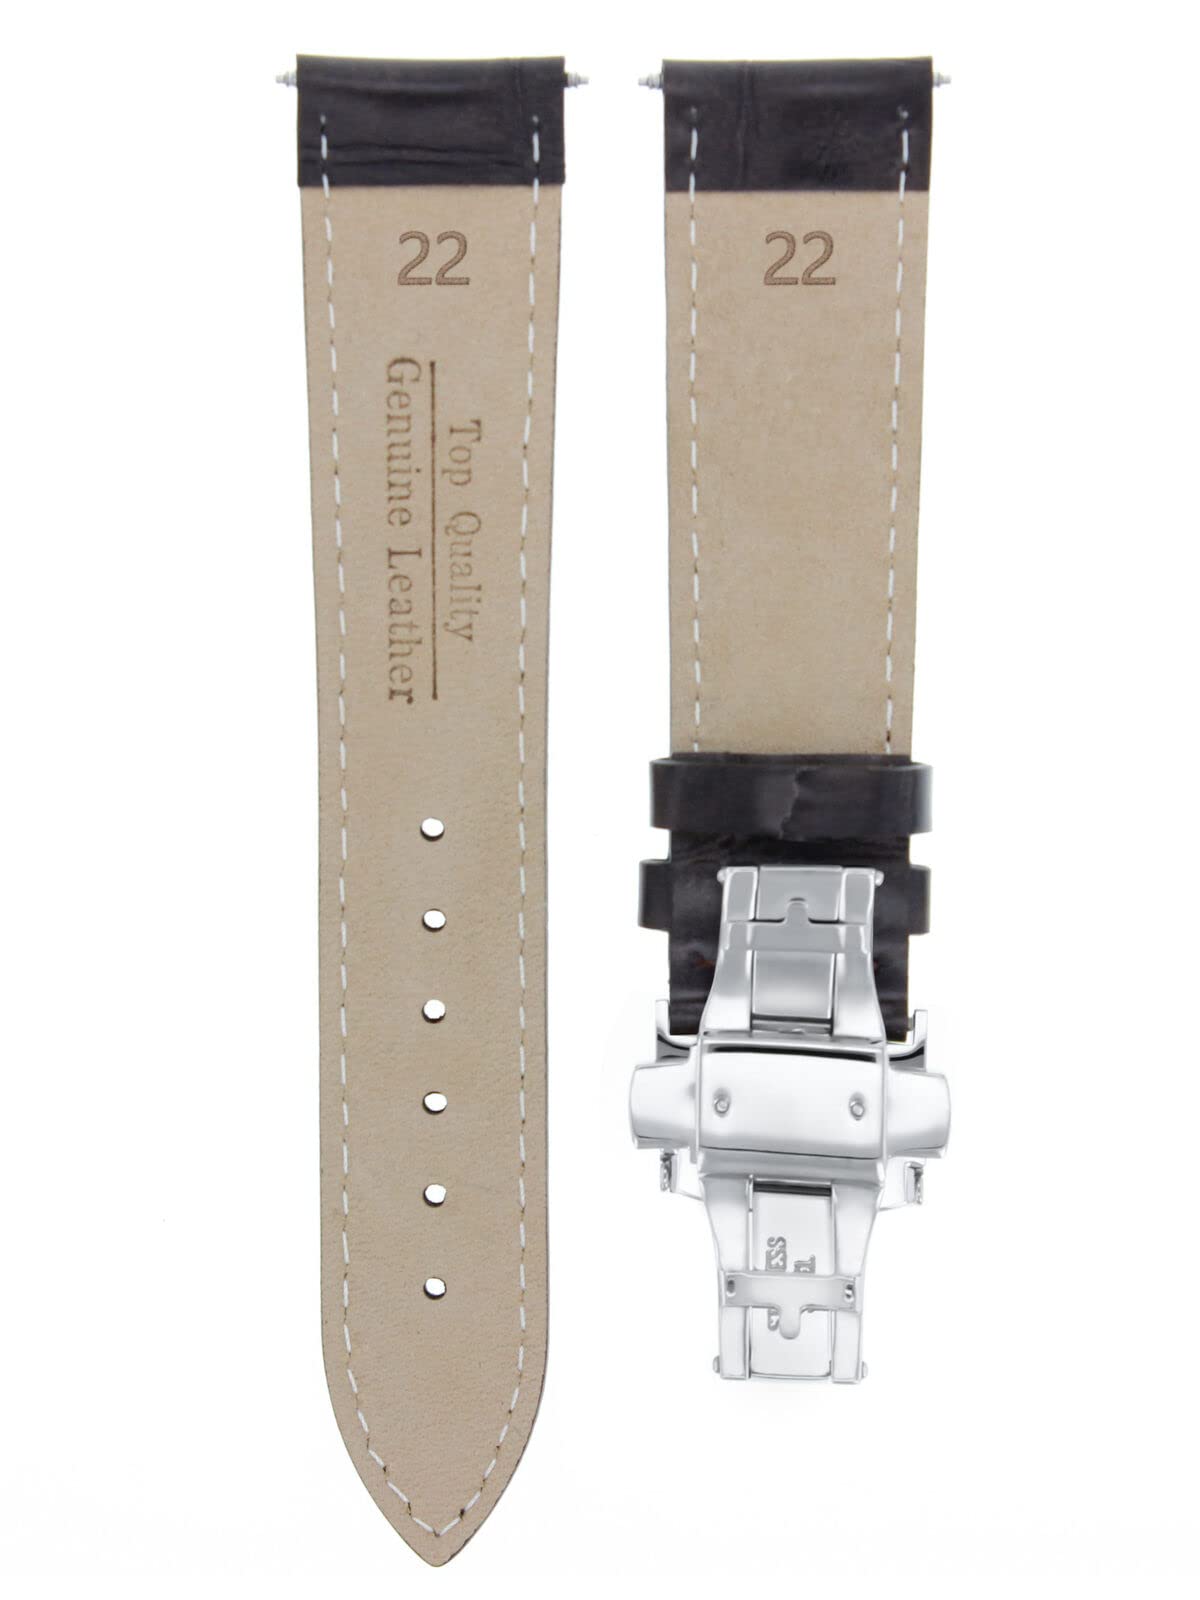 Ewatchparts 22MM LEATHER BAND STRAP COMPATIBLE WITH BAUME MERCIER CAPELAND DEPLOYMENT CLASP DARK BROWN